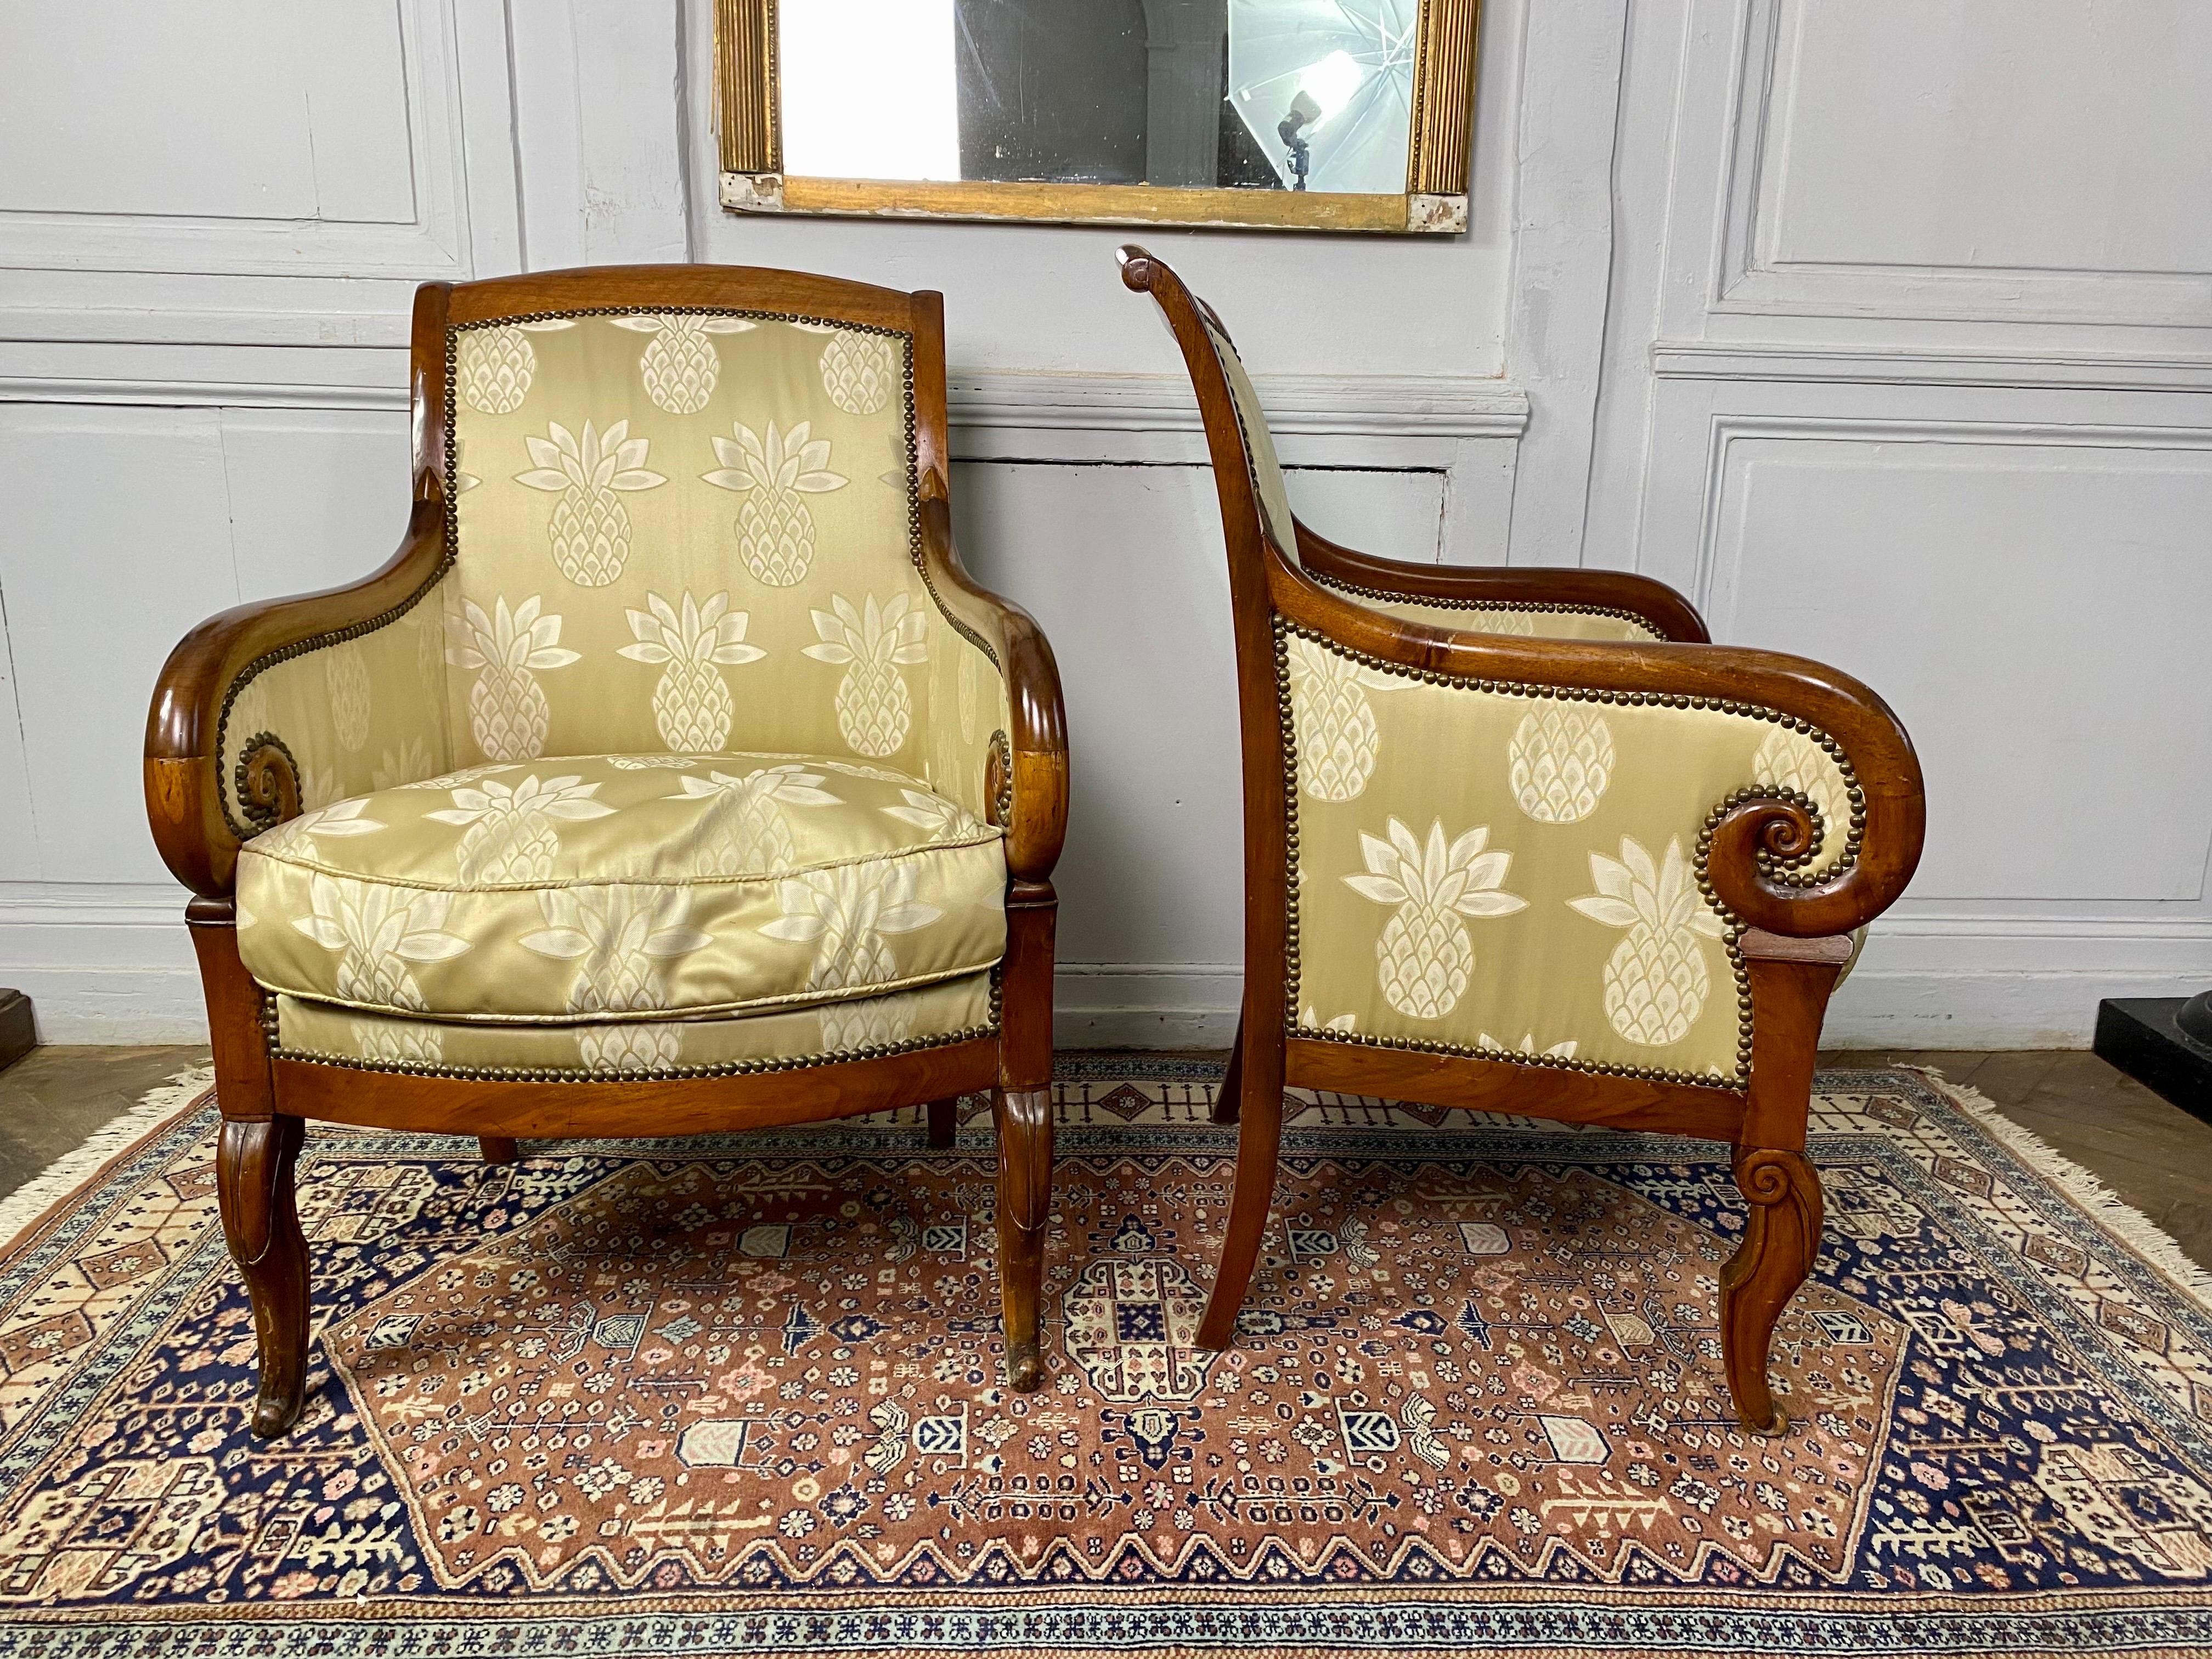 Pair of Armchairs from the Louis-Philippe Period Beginning of the 19th Century 1